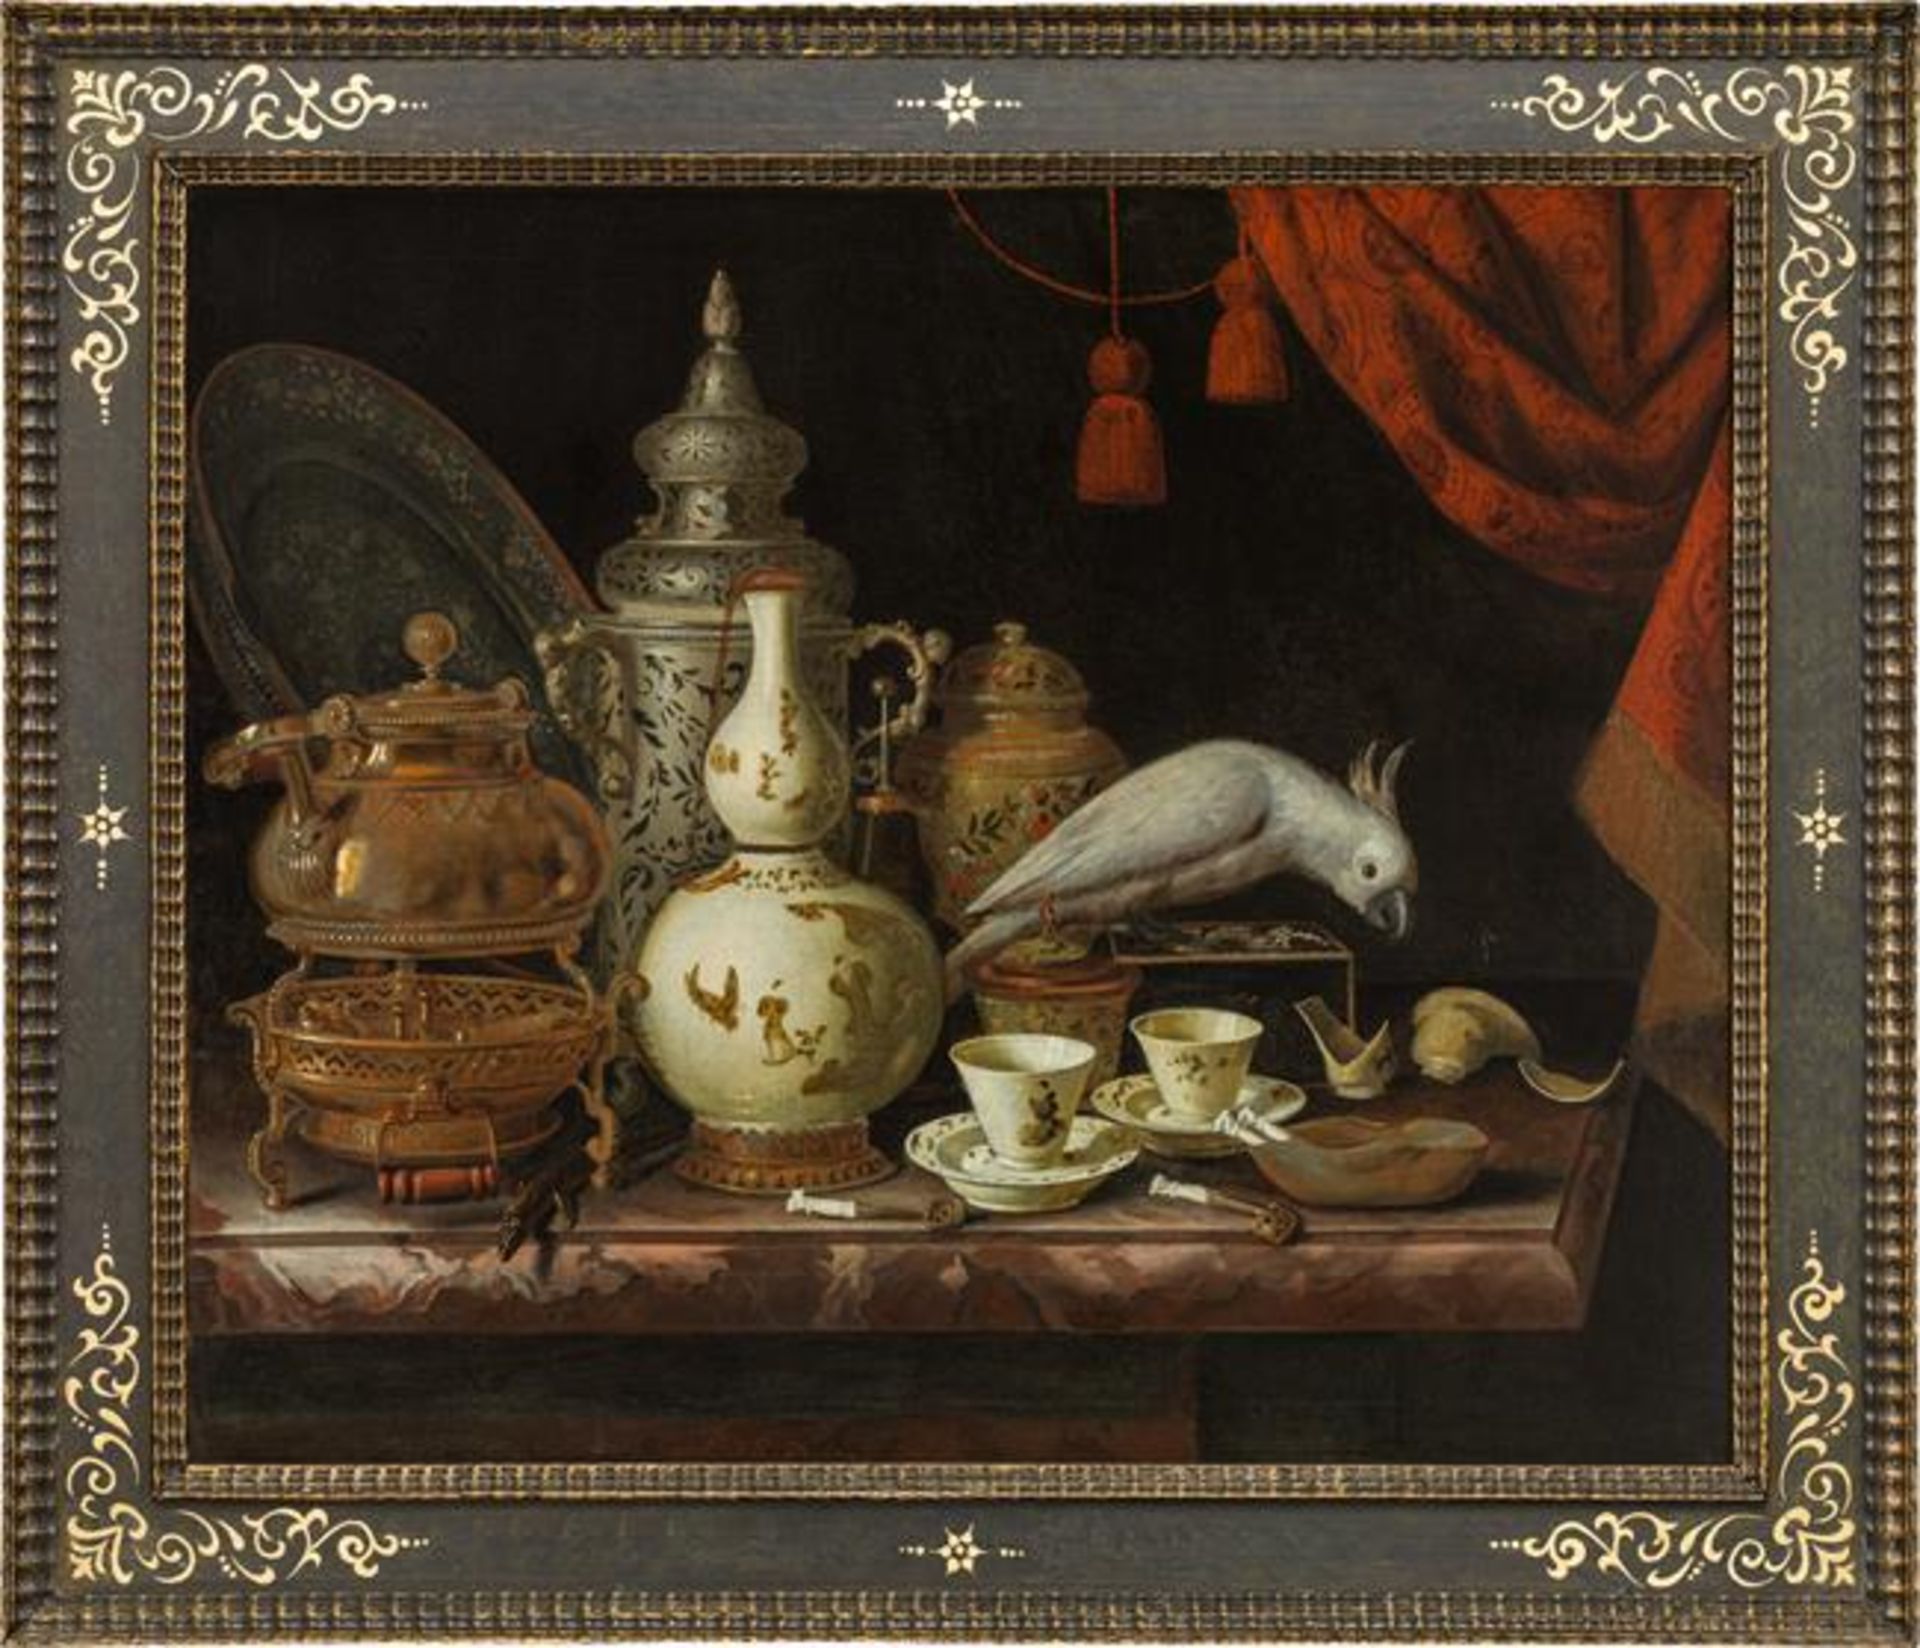 Pieter Gerritsz. van Roestraten: Still life with porcelain, silver and cockatoo - Image 2 of 2